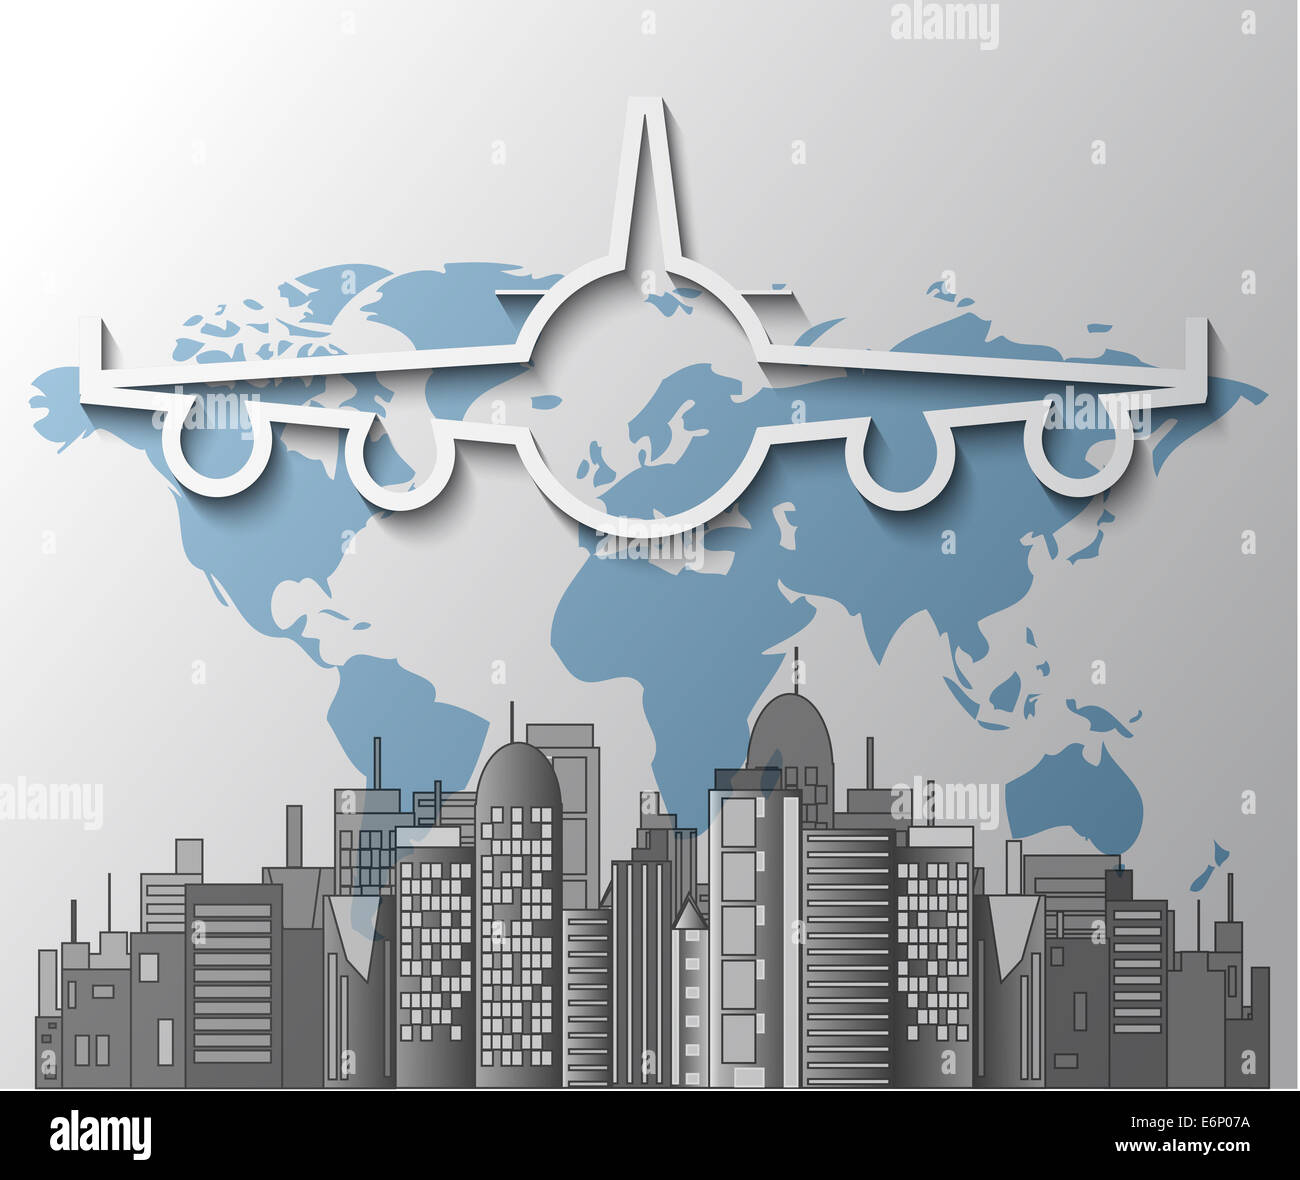 Illustration of airplane with city skyline on world map Stock Photo